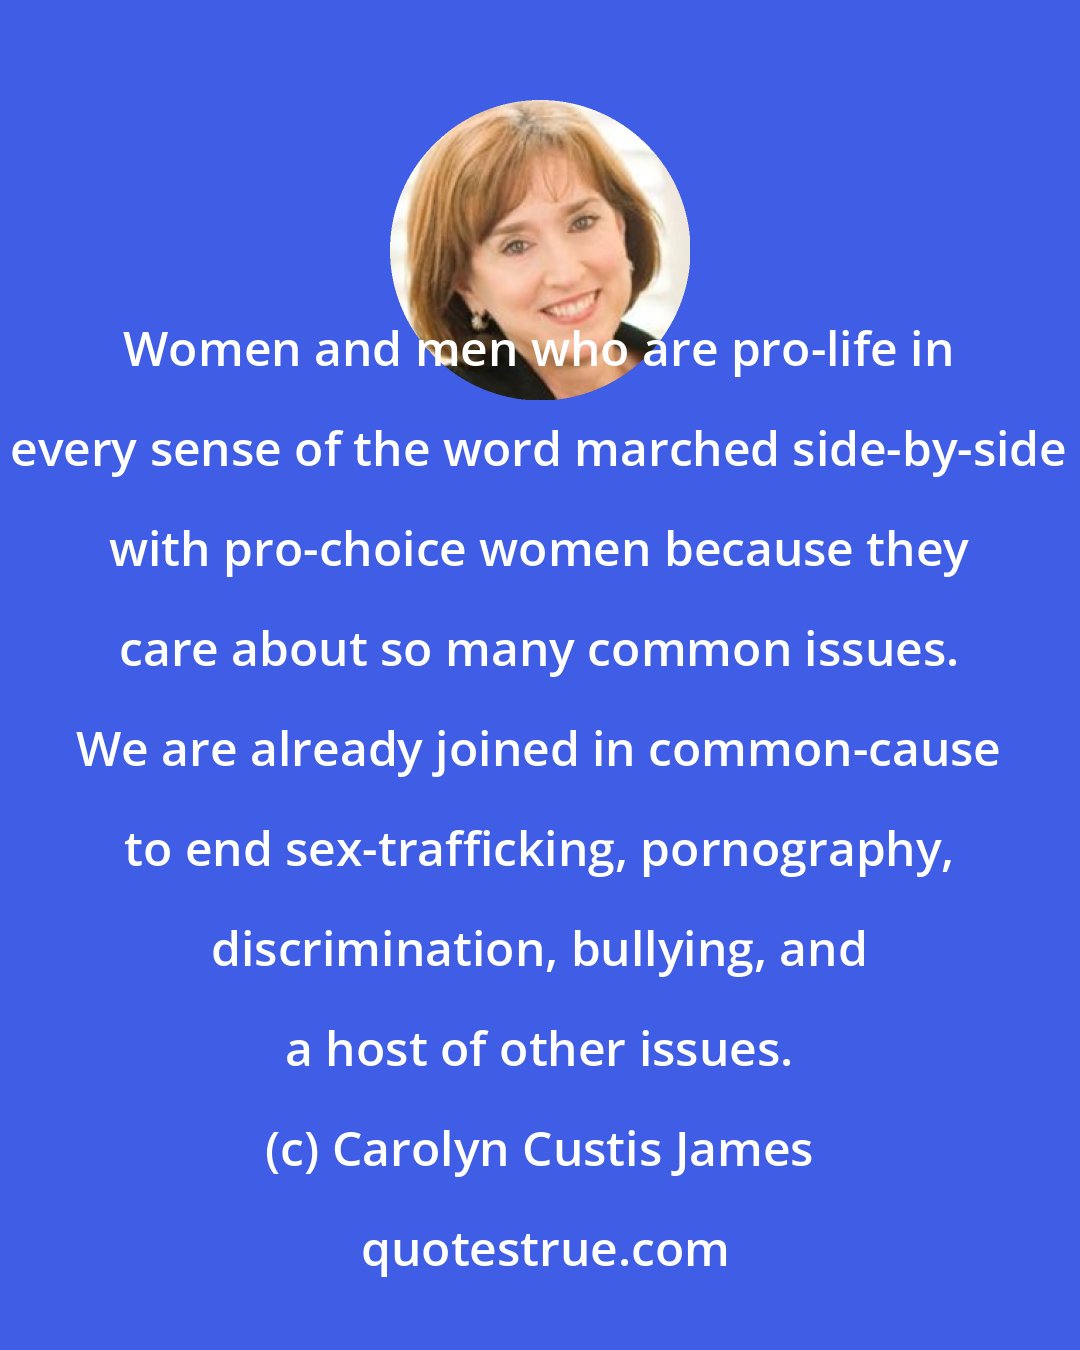 Carolyn Custis James: Women and men who are pro-life in every sense of the word marched side-by-side with pro-choice women because they care about so many common issues. We are already joined in common-cause to end sex-trafficking, pornography, discrimination, bullying, and a host of other issues.